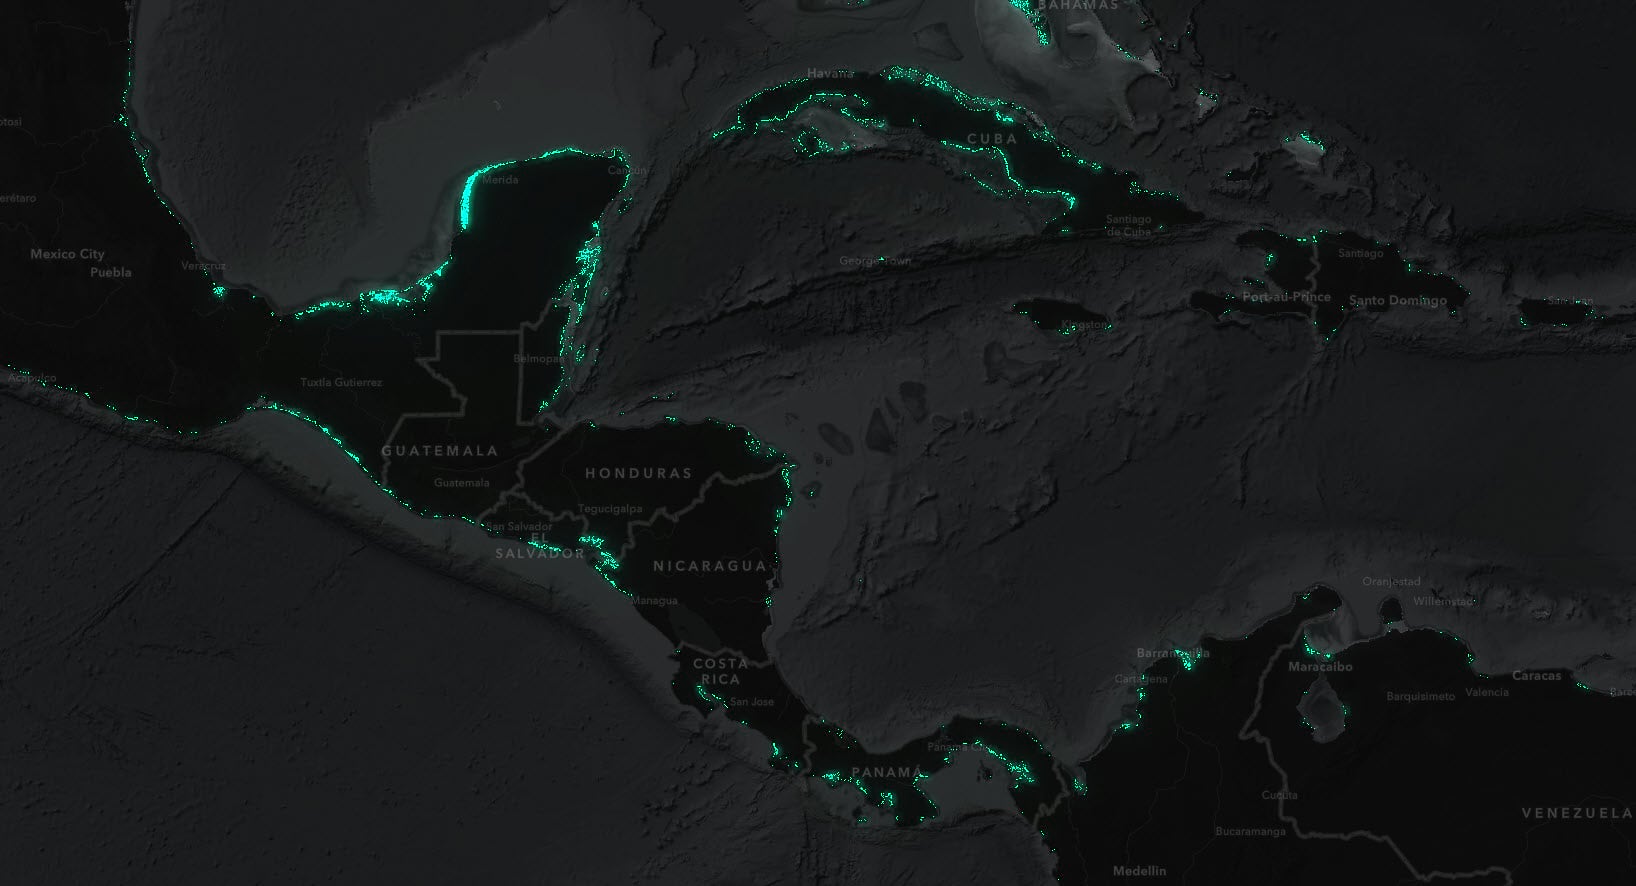 Map showing mangroves in Central America and the Caribbean Sea.